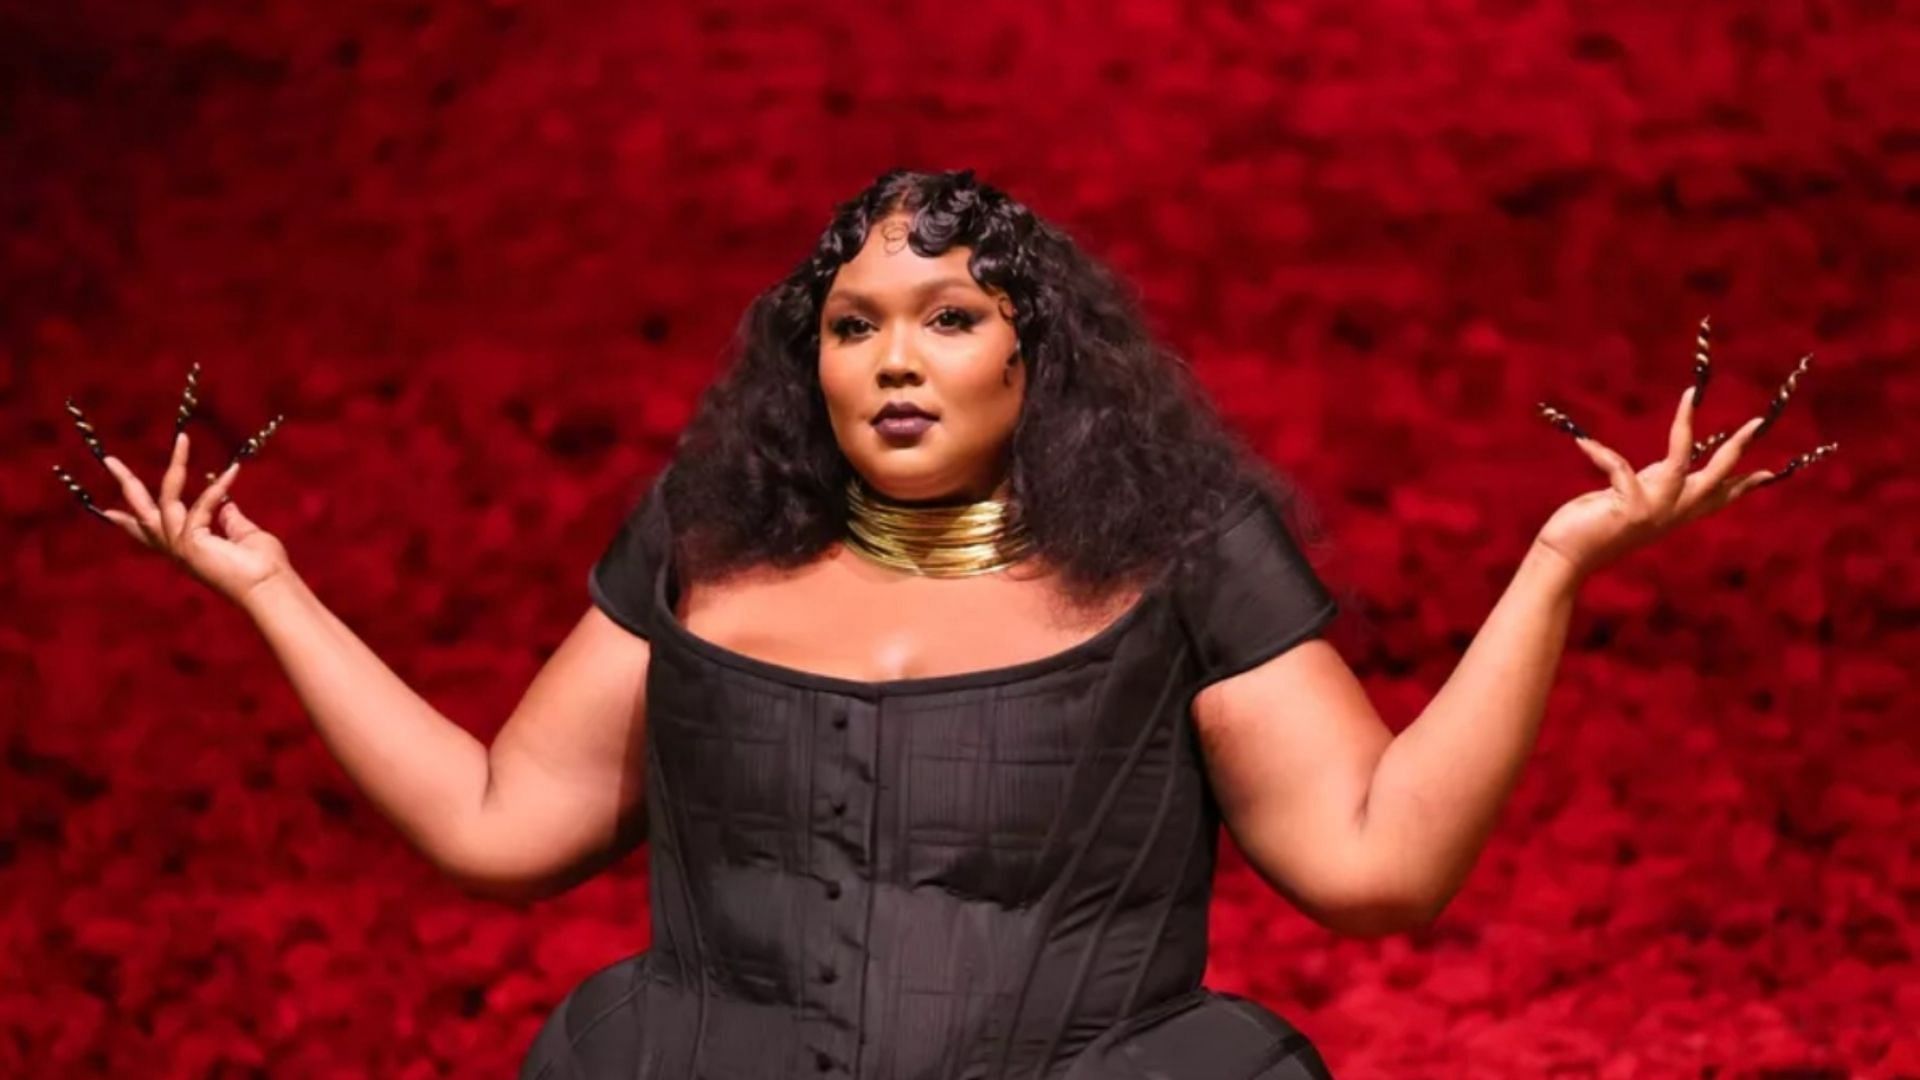 Lizzo has announced that she will donate $1 million from concert proceeds to Planned Parenthood. (Image via Getty)